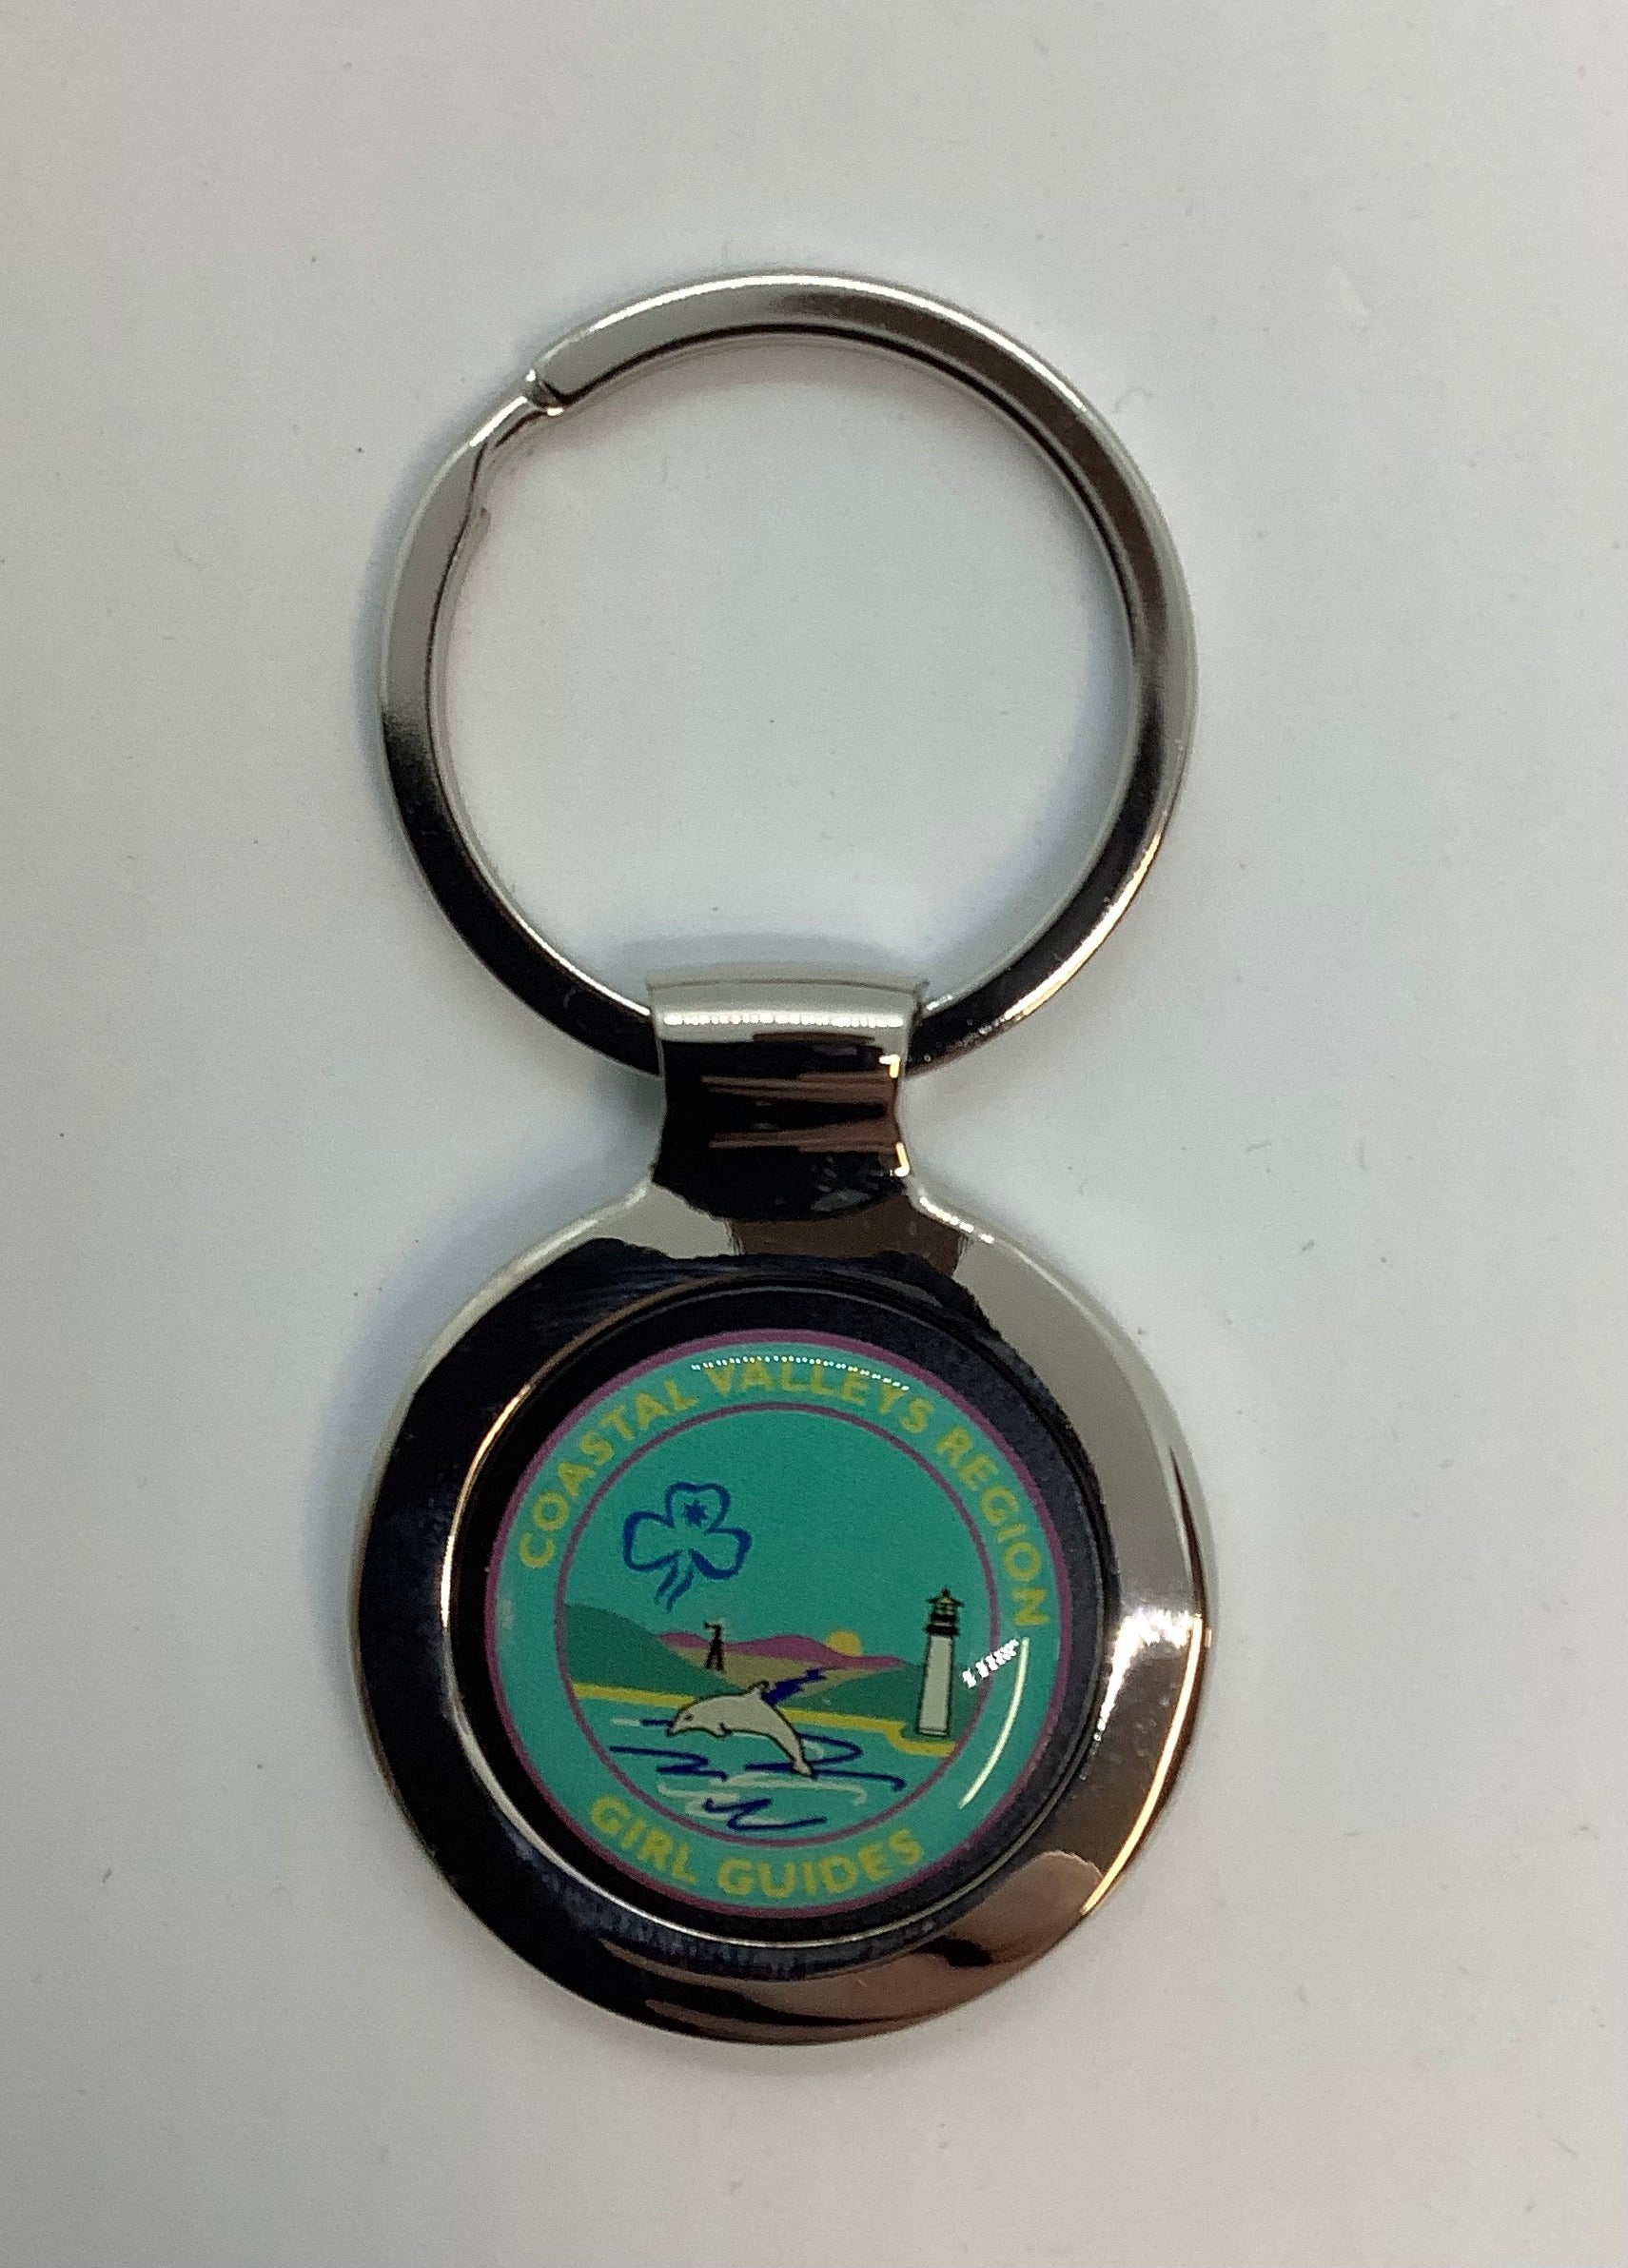 a round silver key ring with CVR girl guides in gold on teal enamel with a dolphin and lighthouse 